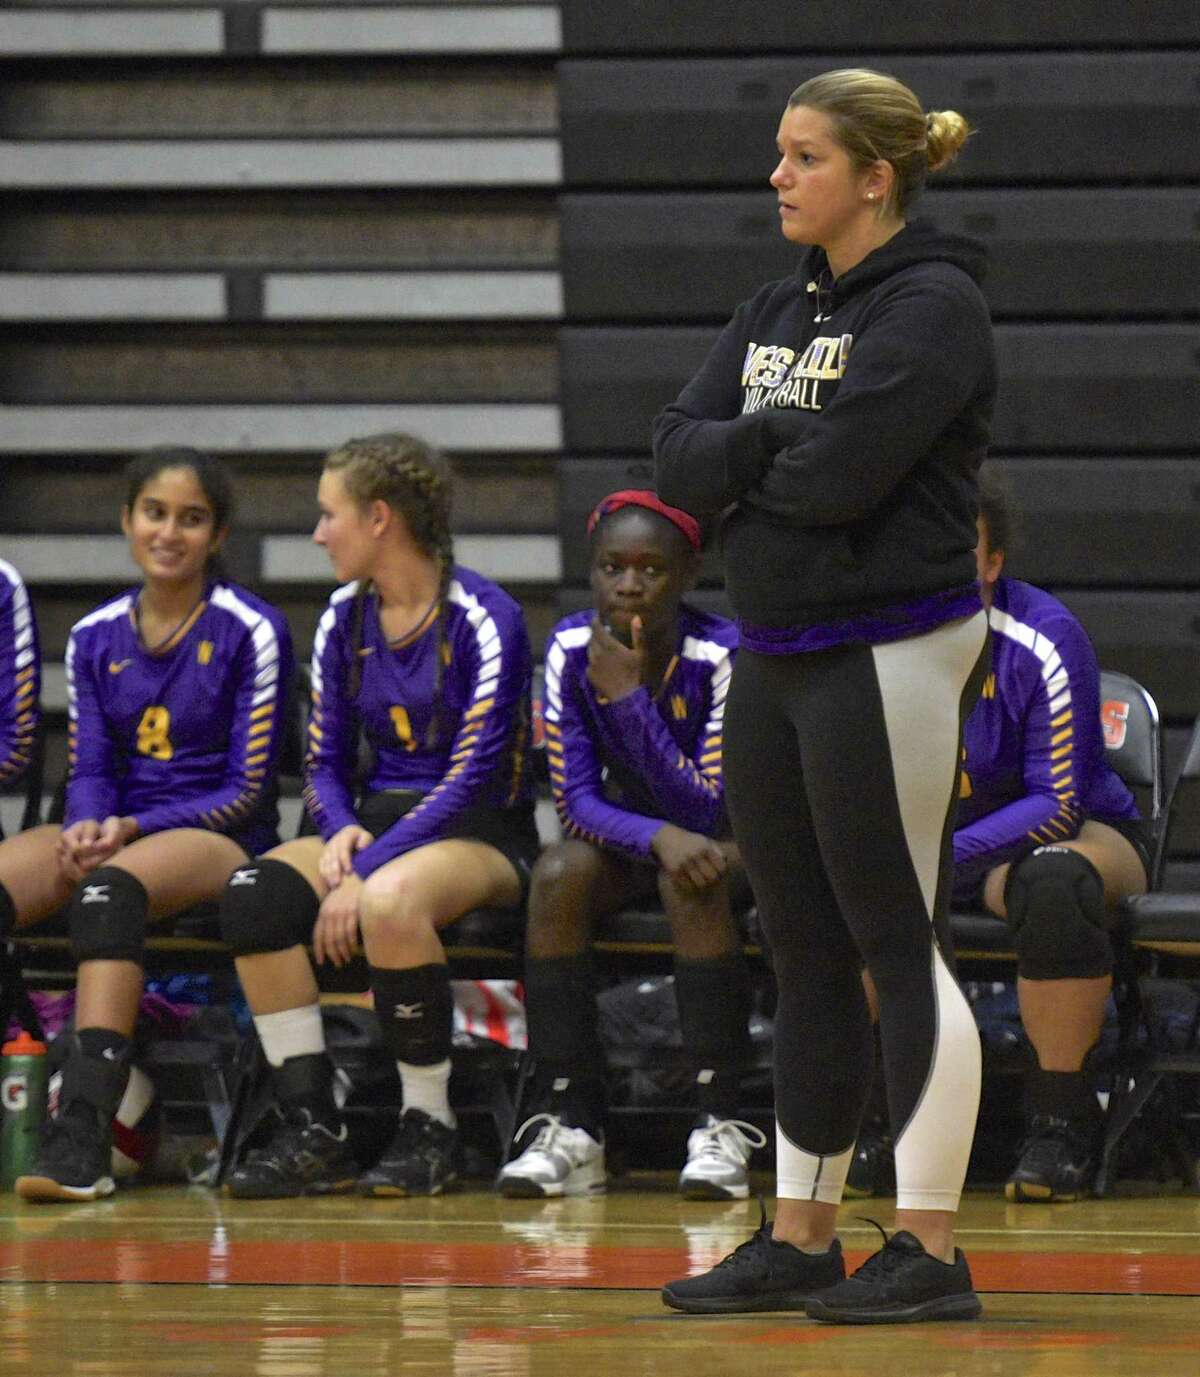 Westhill head coach Marianna Capomolla watches her team in the girls volleyball game between Westhill and Ridgefield high schools on Oct. 25, 2017, at Ridgefield High School, in Ridgefield, Conn.